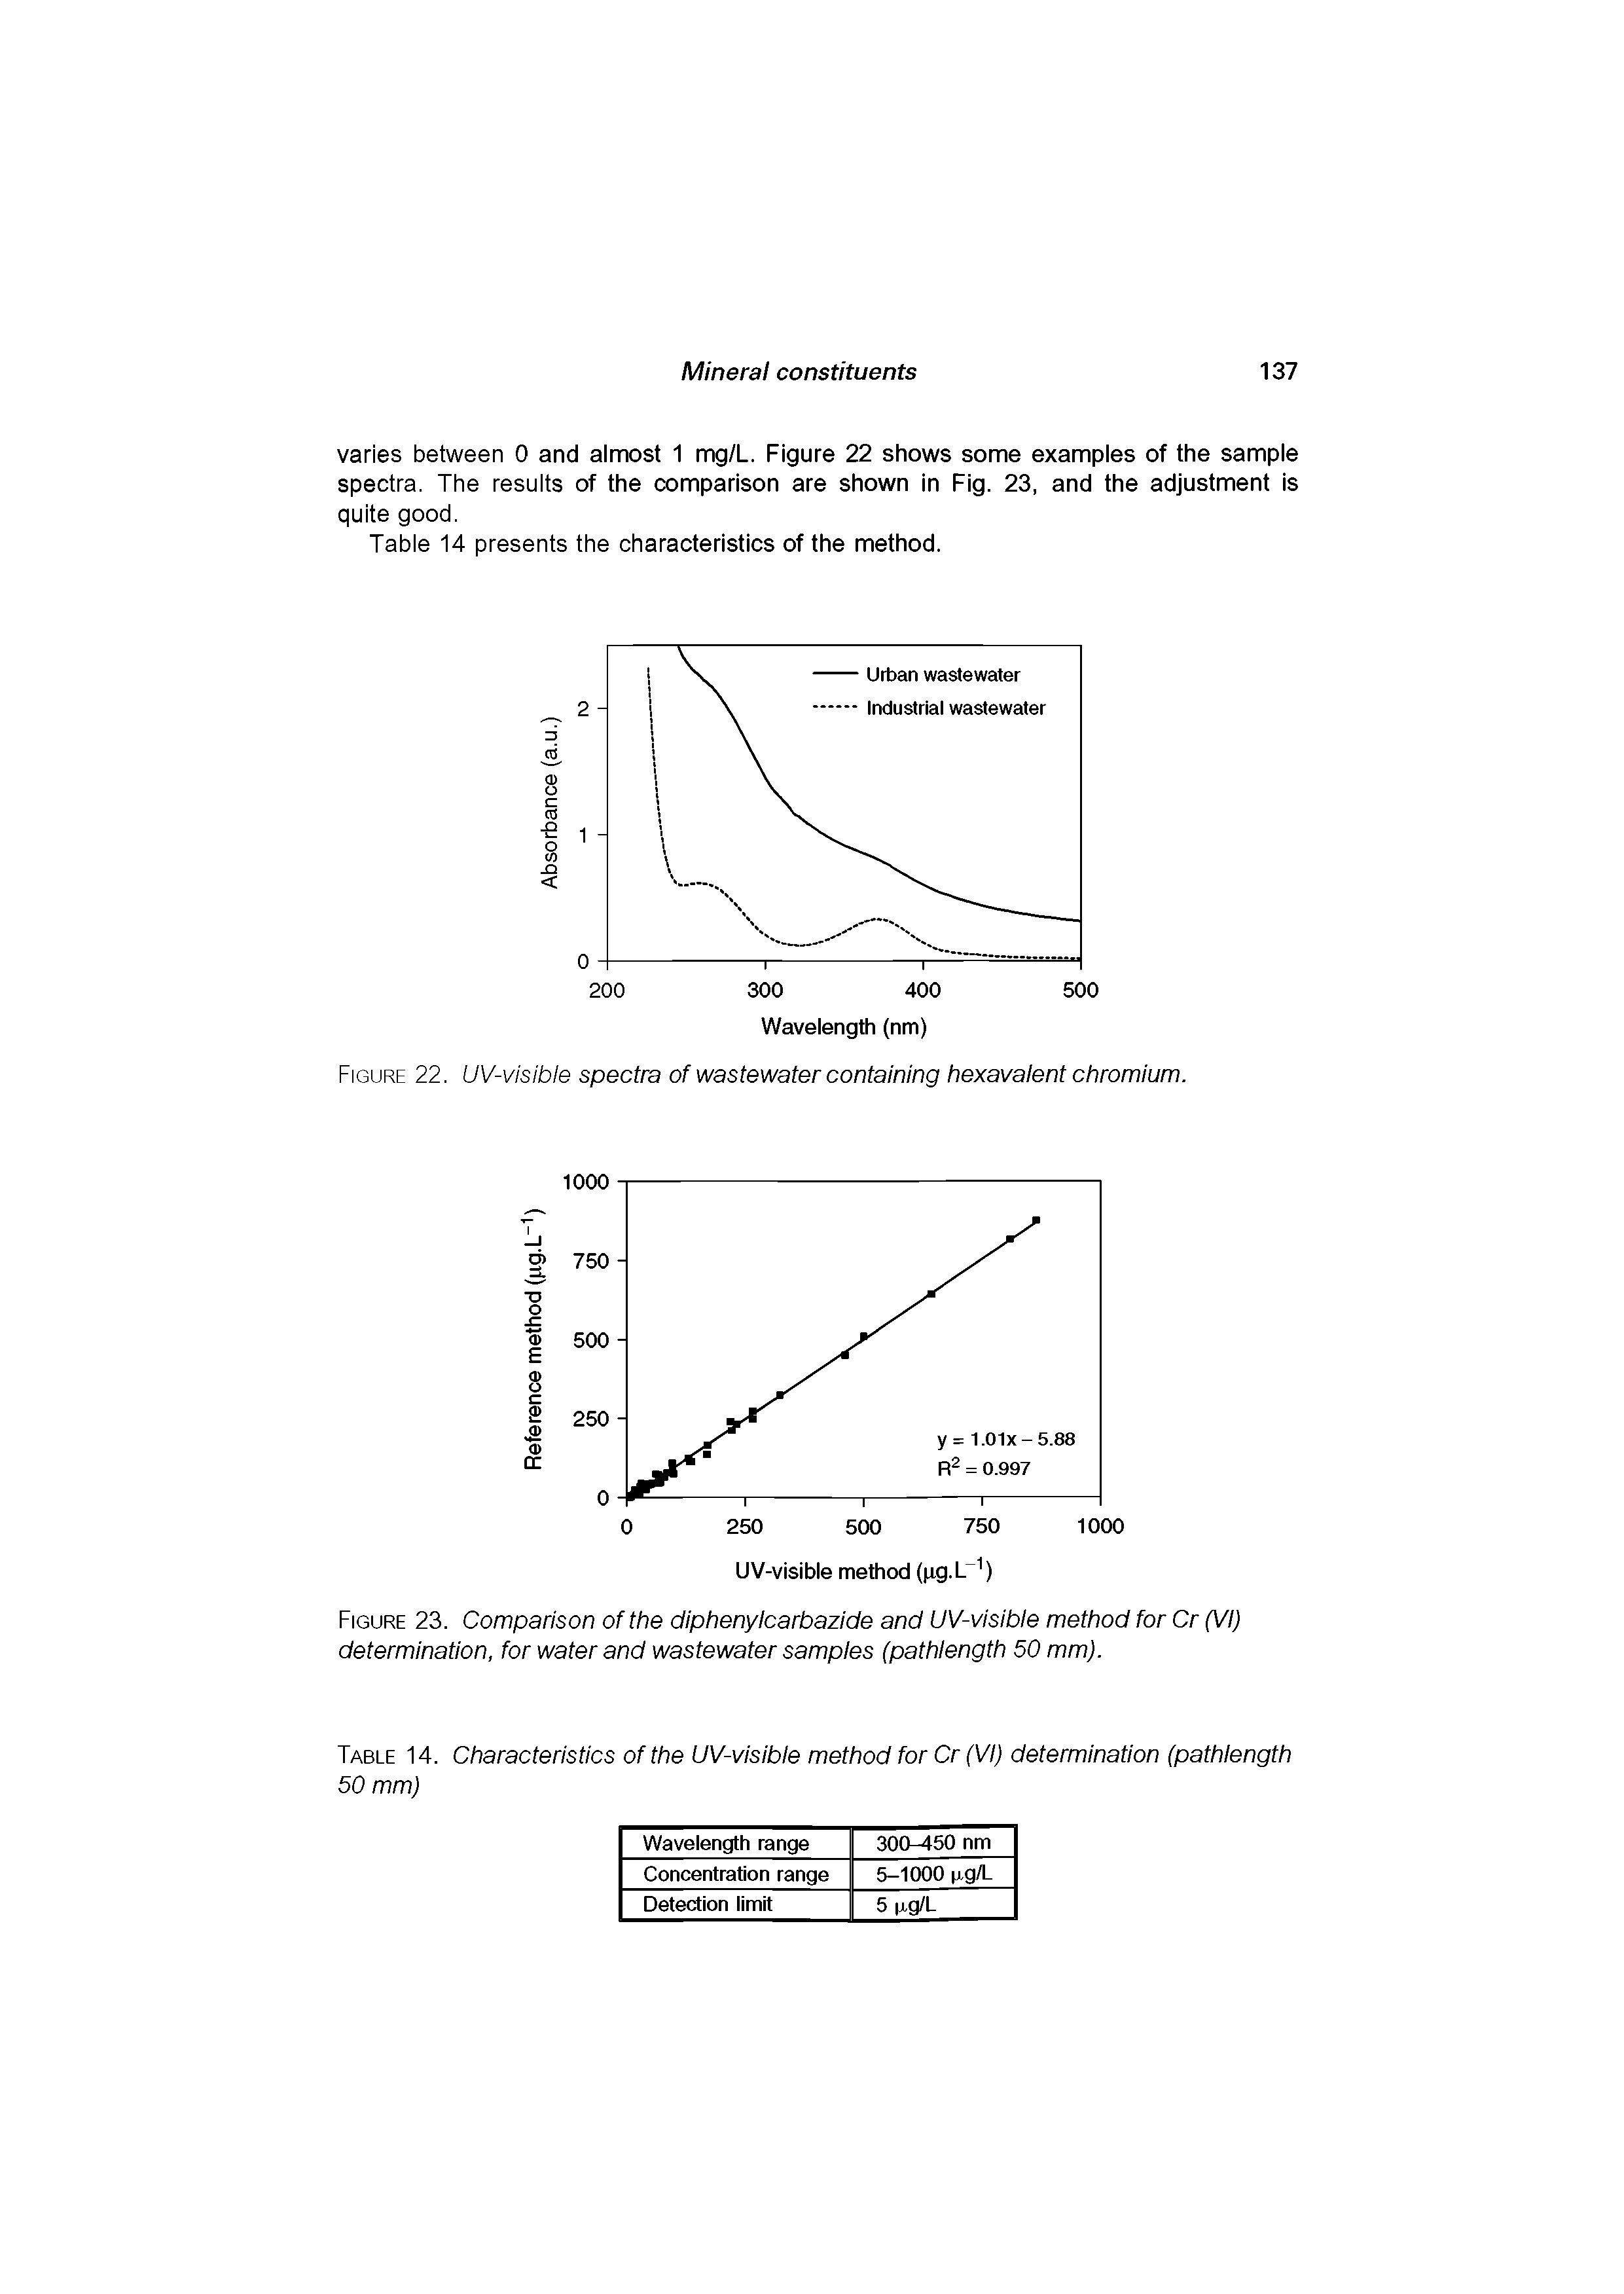 Figure 23. Comparison of the diphenylcarbazide and UV-visible method for Cr (VI) determination, for water and wastewater samples (pathlength 50 mm).